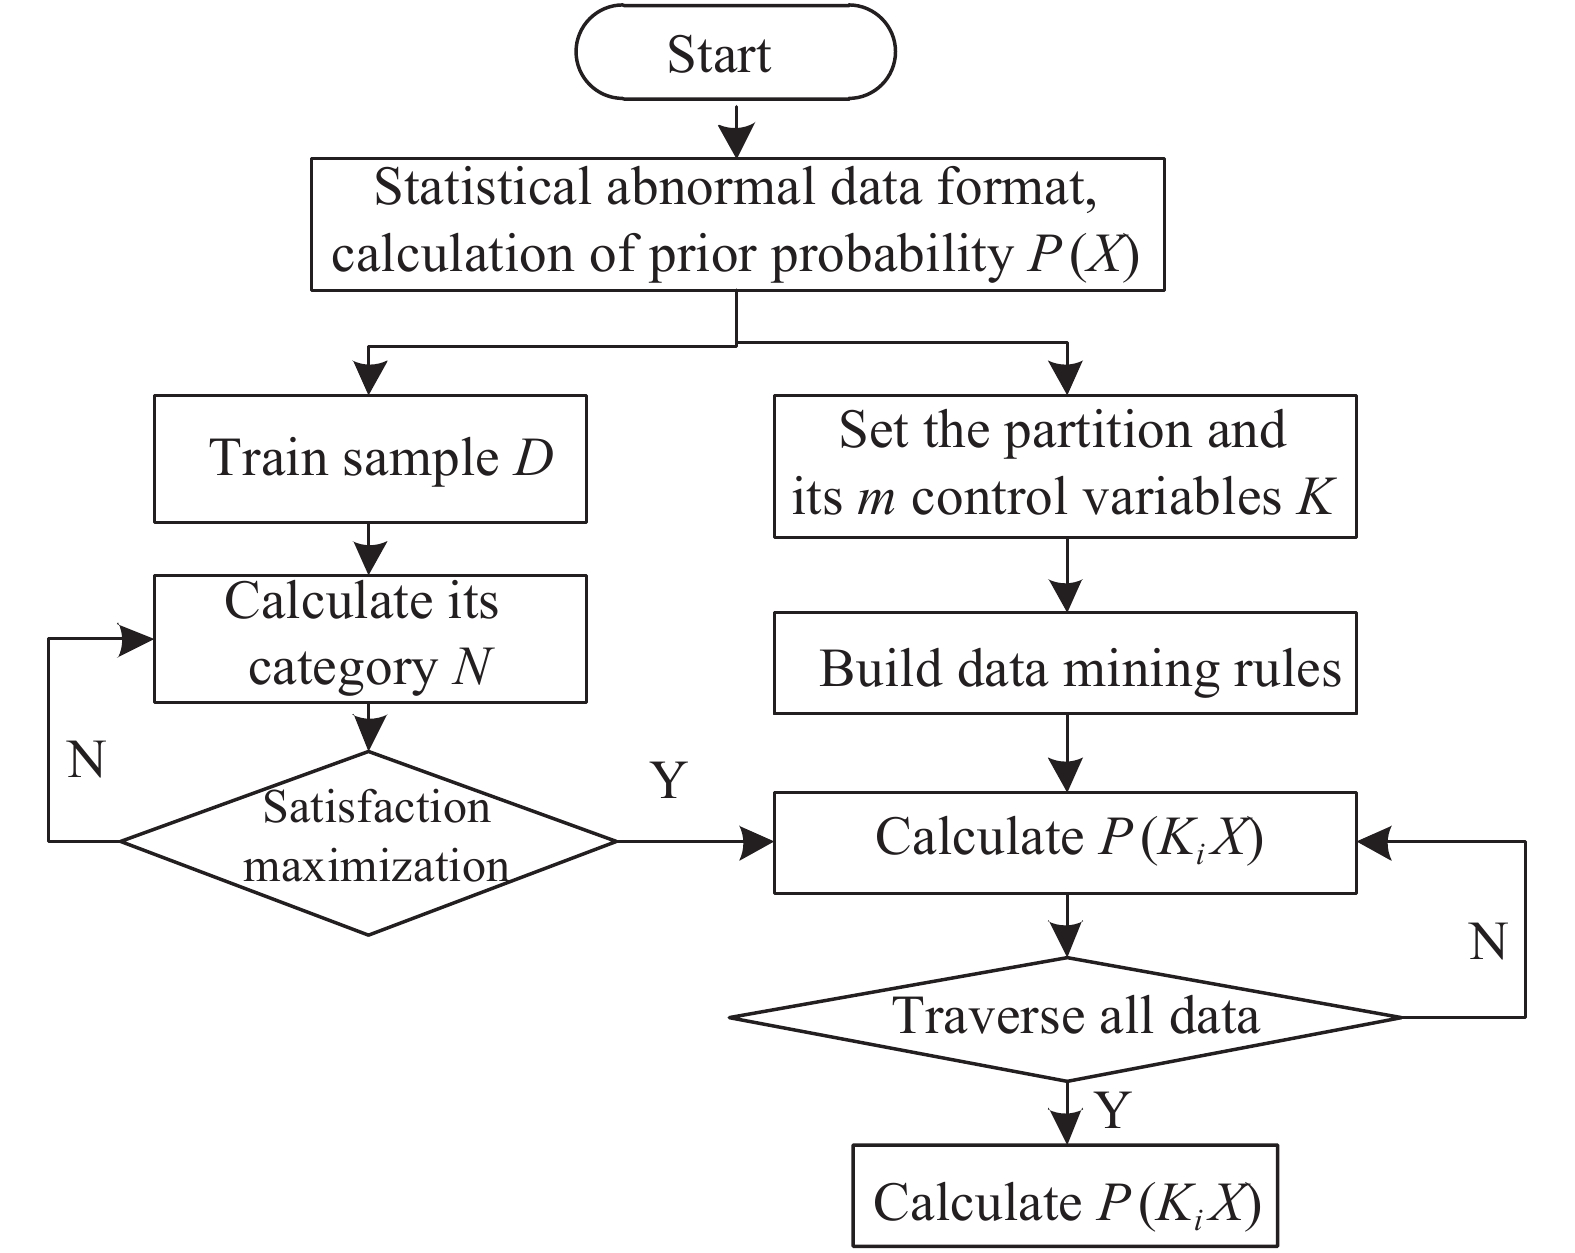 Flow chart of data mining algorithm based on Bayesian partition